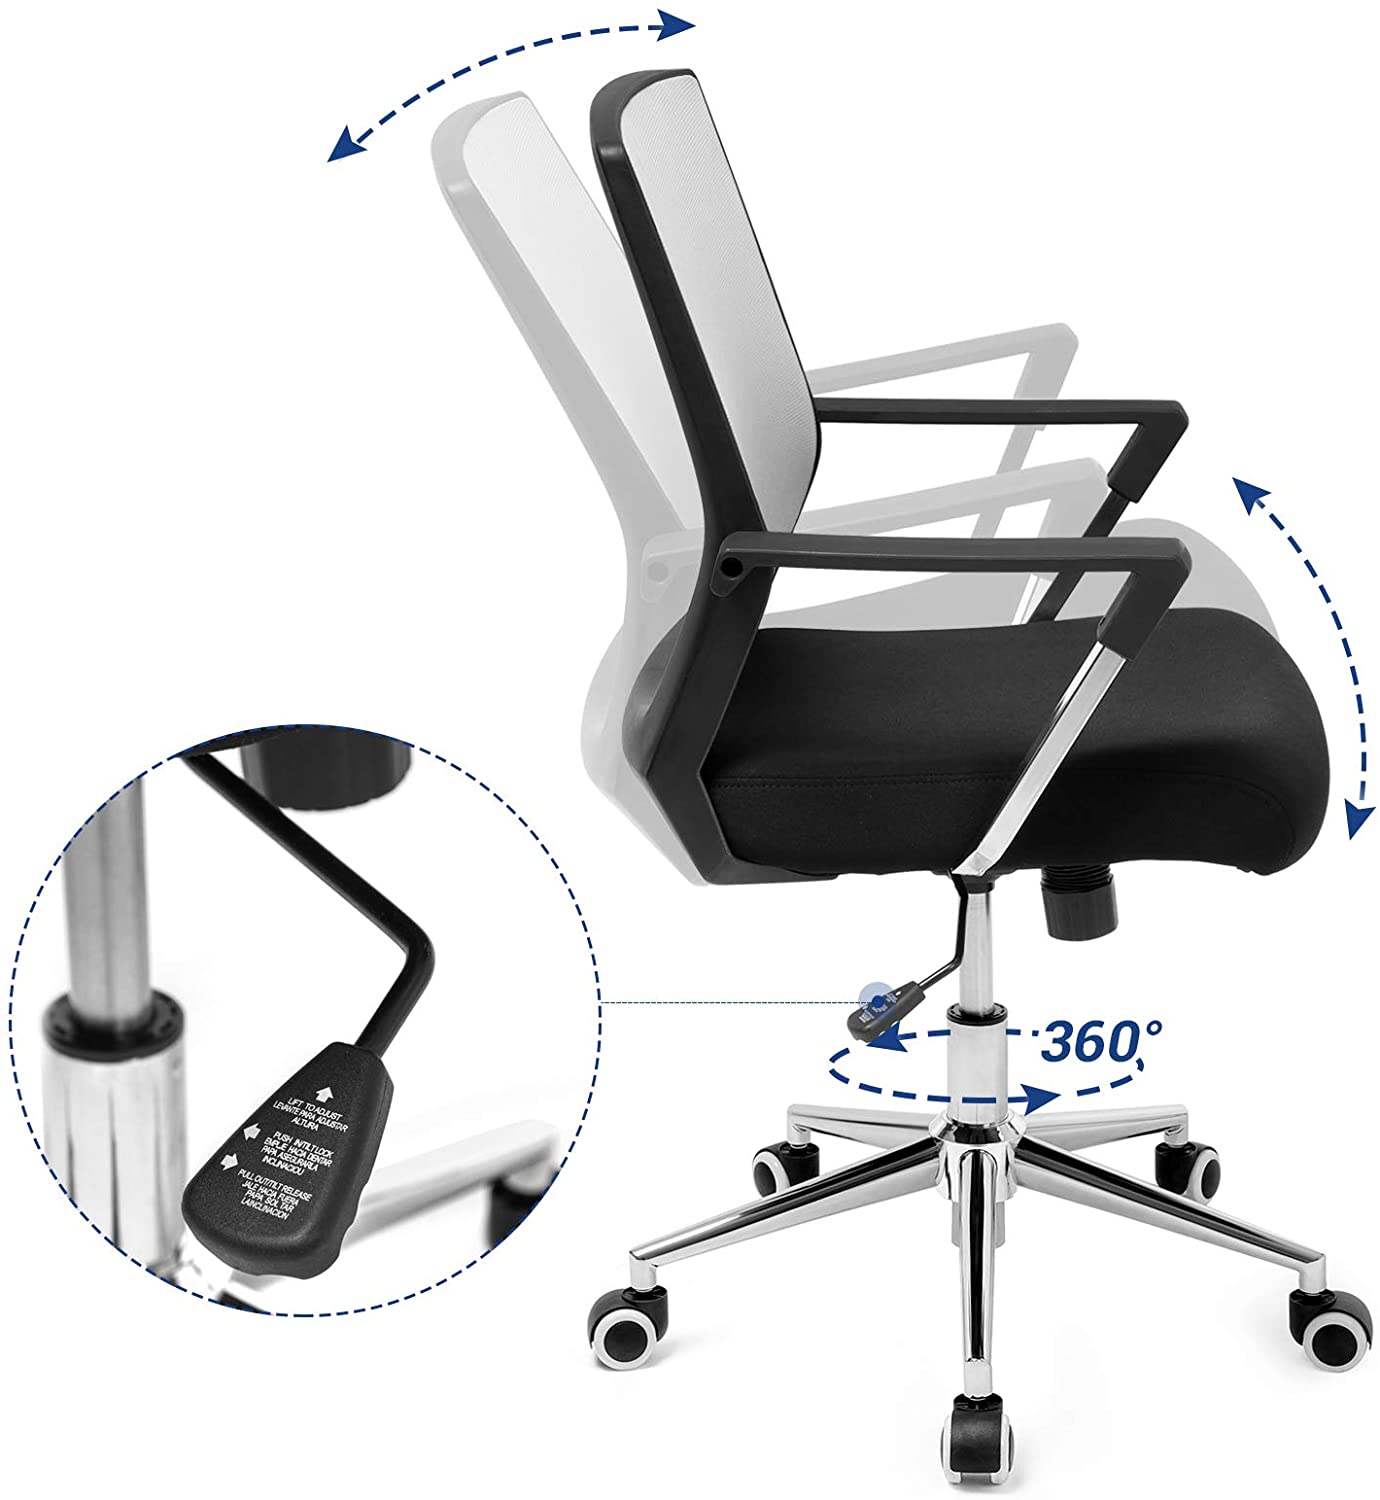 Office Swivel Chair, Mesh Desk Chair, with Chrome-Plated Steel Frame, Height Adjustable, with Tilt Function, Maks. Load Capacity: 150 kg, Grey and Black OBN83GY RAW58.dk 